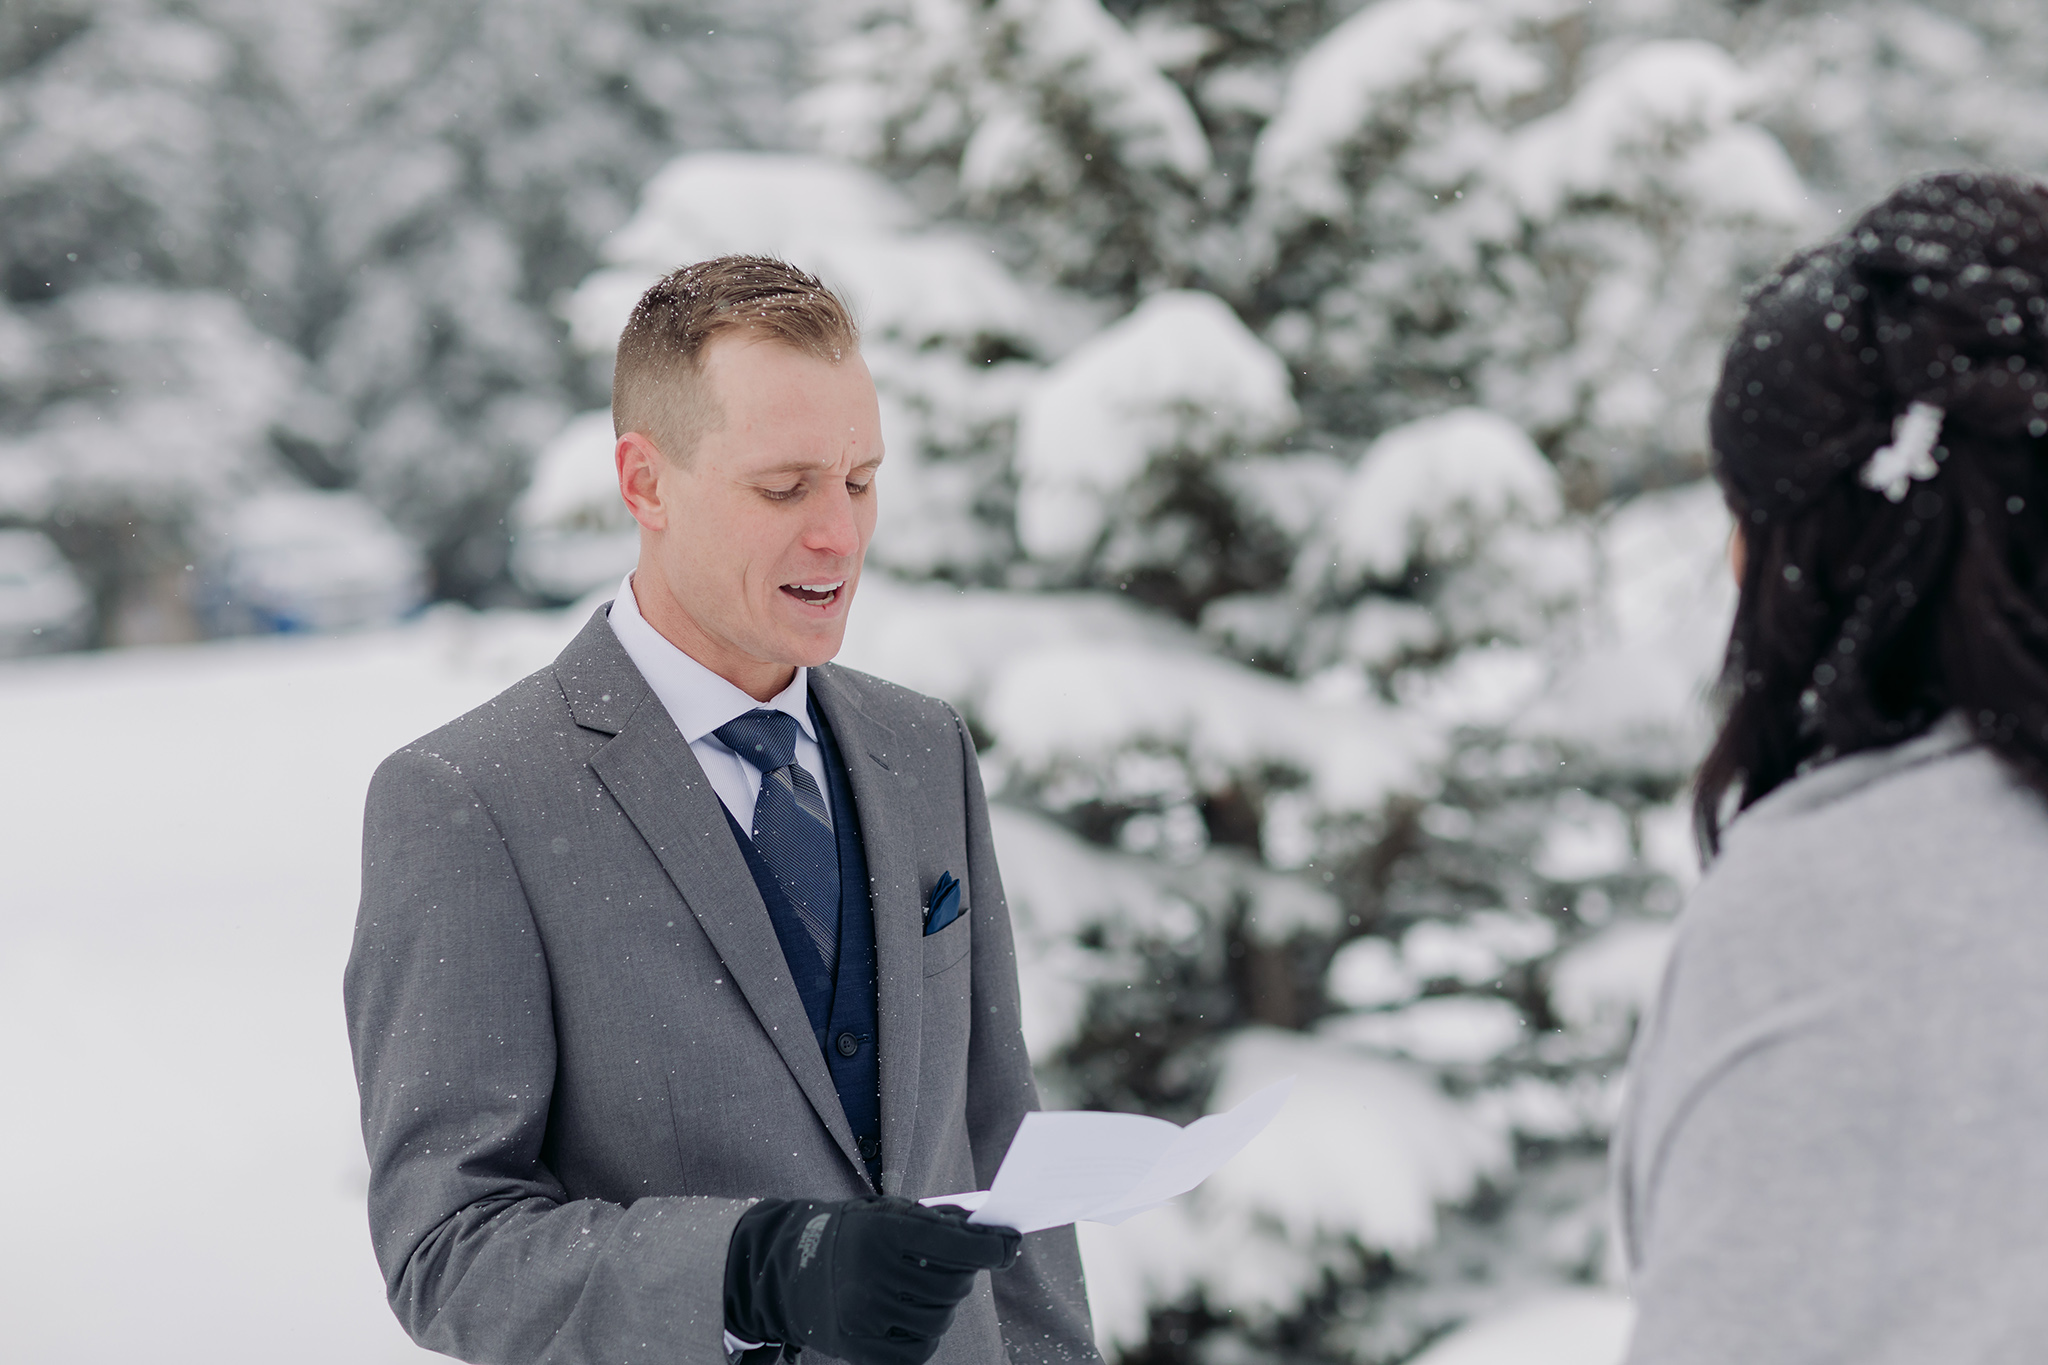 Cascade Ponds winter wedding outdoor ceremony in a snow storm in Banff National Park in the Canadian Rocky Mountains photographed by ENV Photography